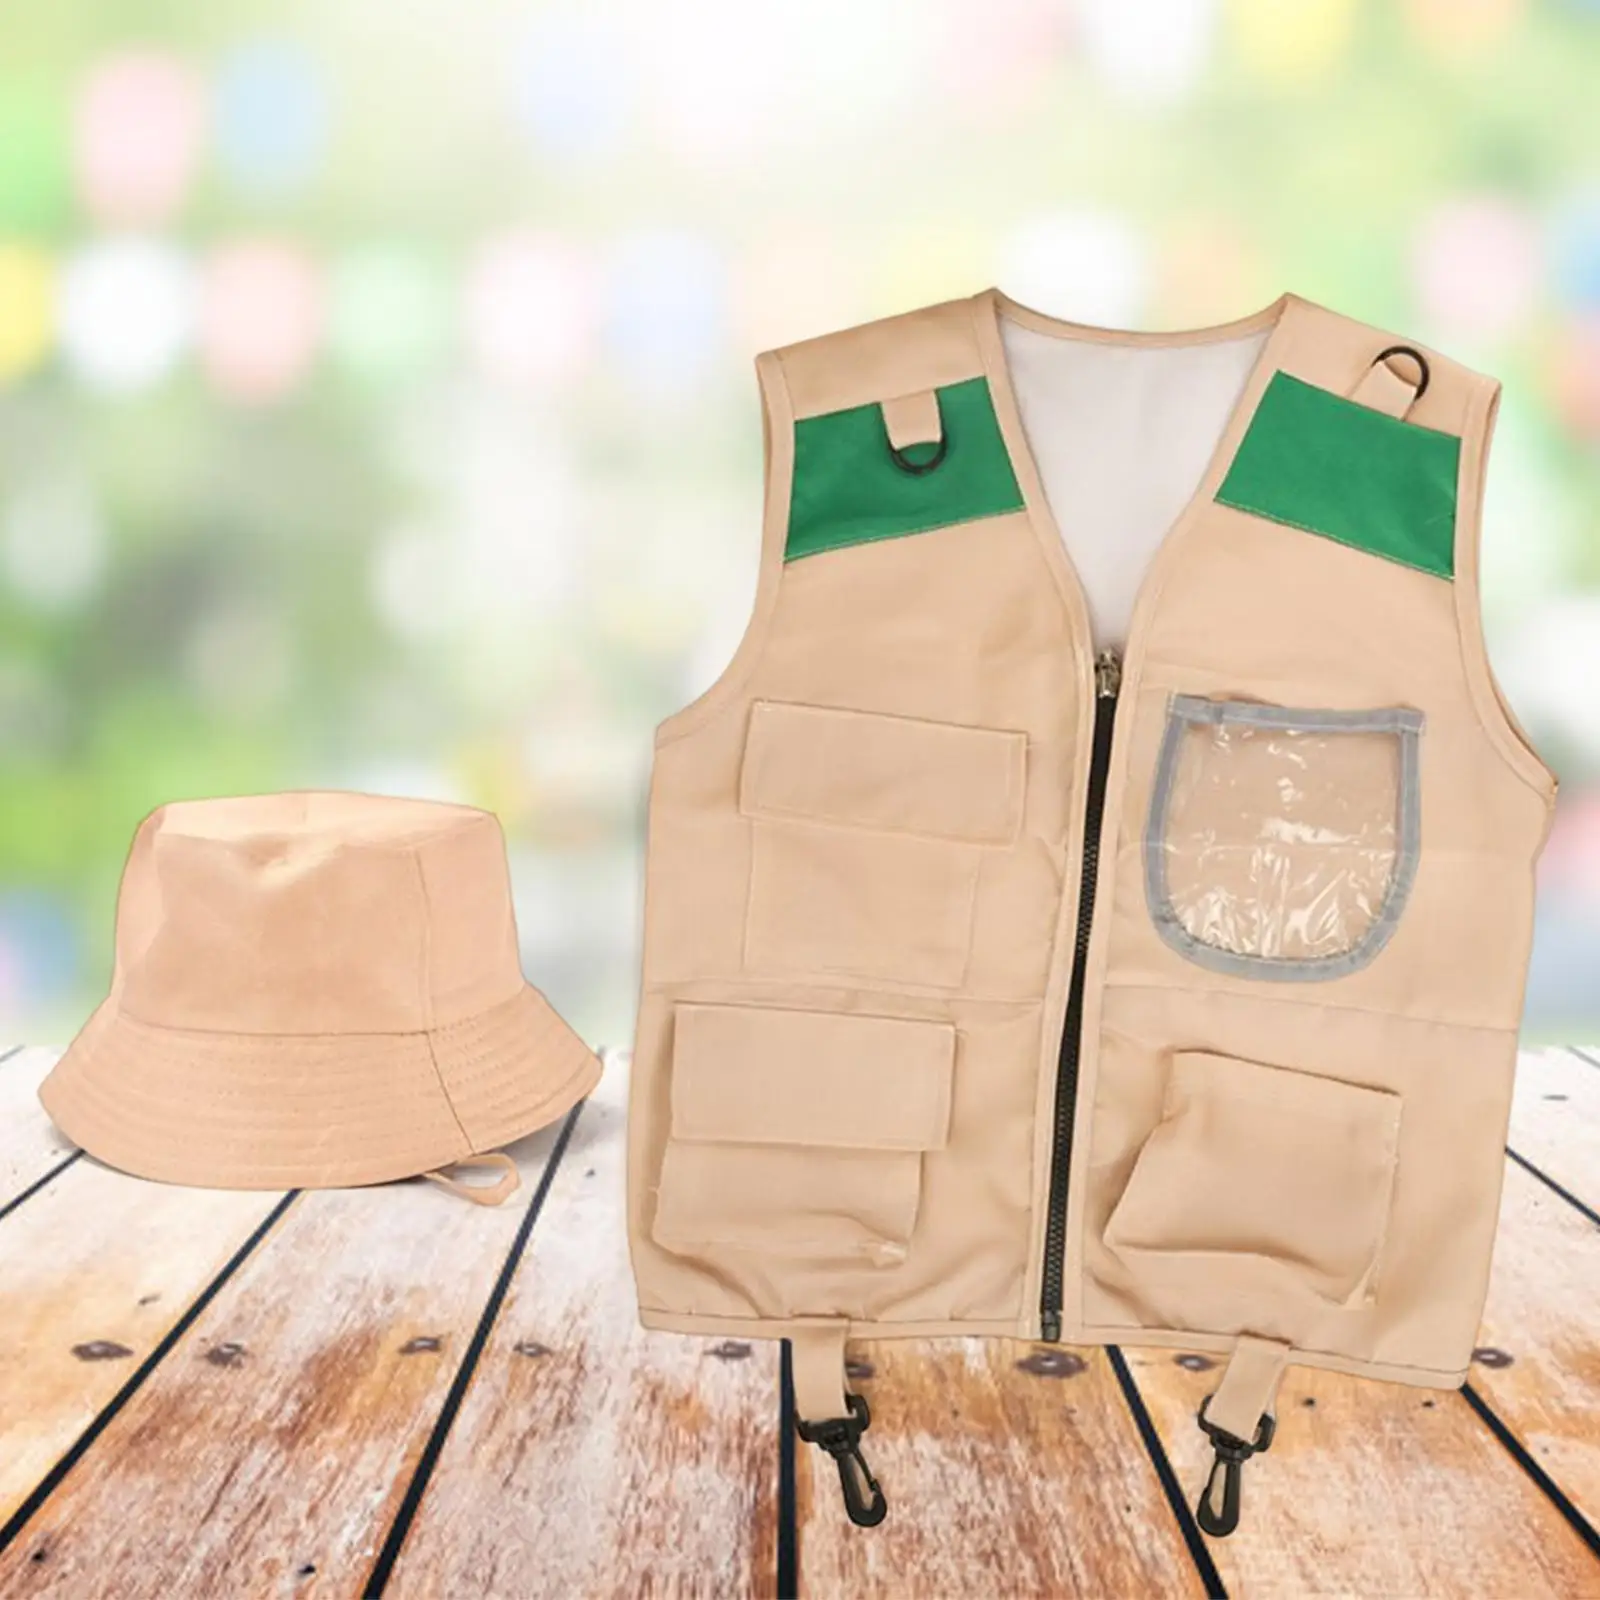 Kids Explorer Costume Nature Adventures Suit Party Favors with Pockets Dress up Cargo Vest and Hat Set for Camping Exploration